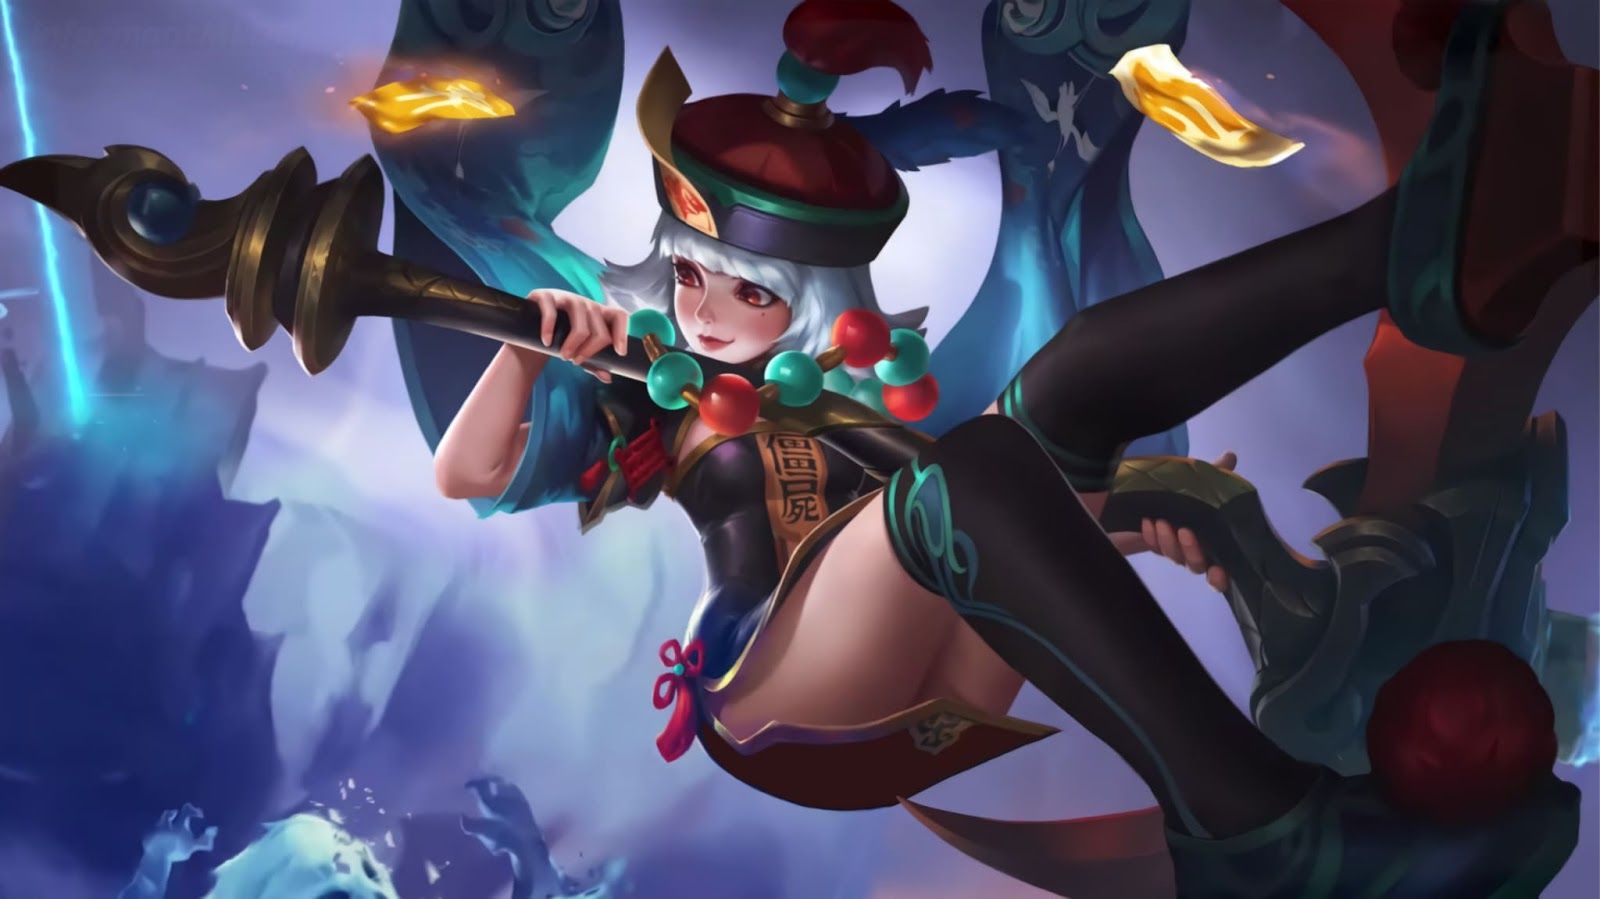 Wallpaper Ruby Mobile Legends (ML) Full HD for PC, Android & iOS